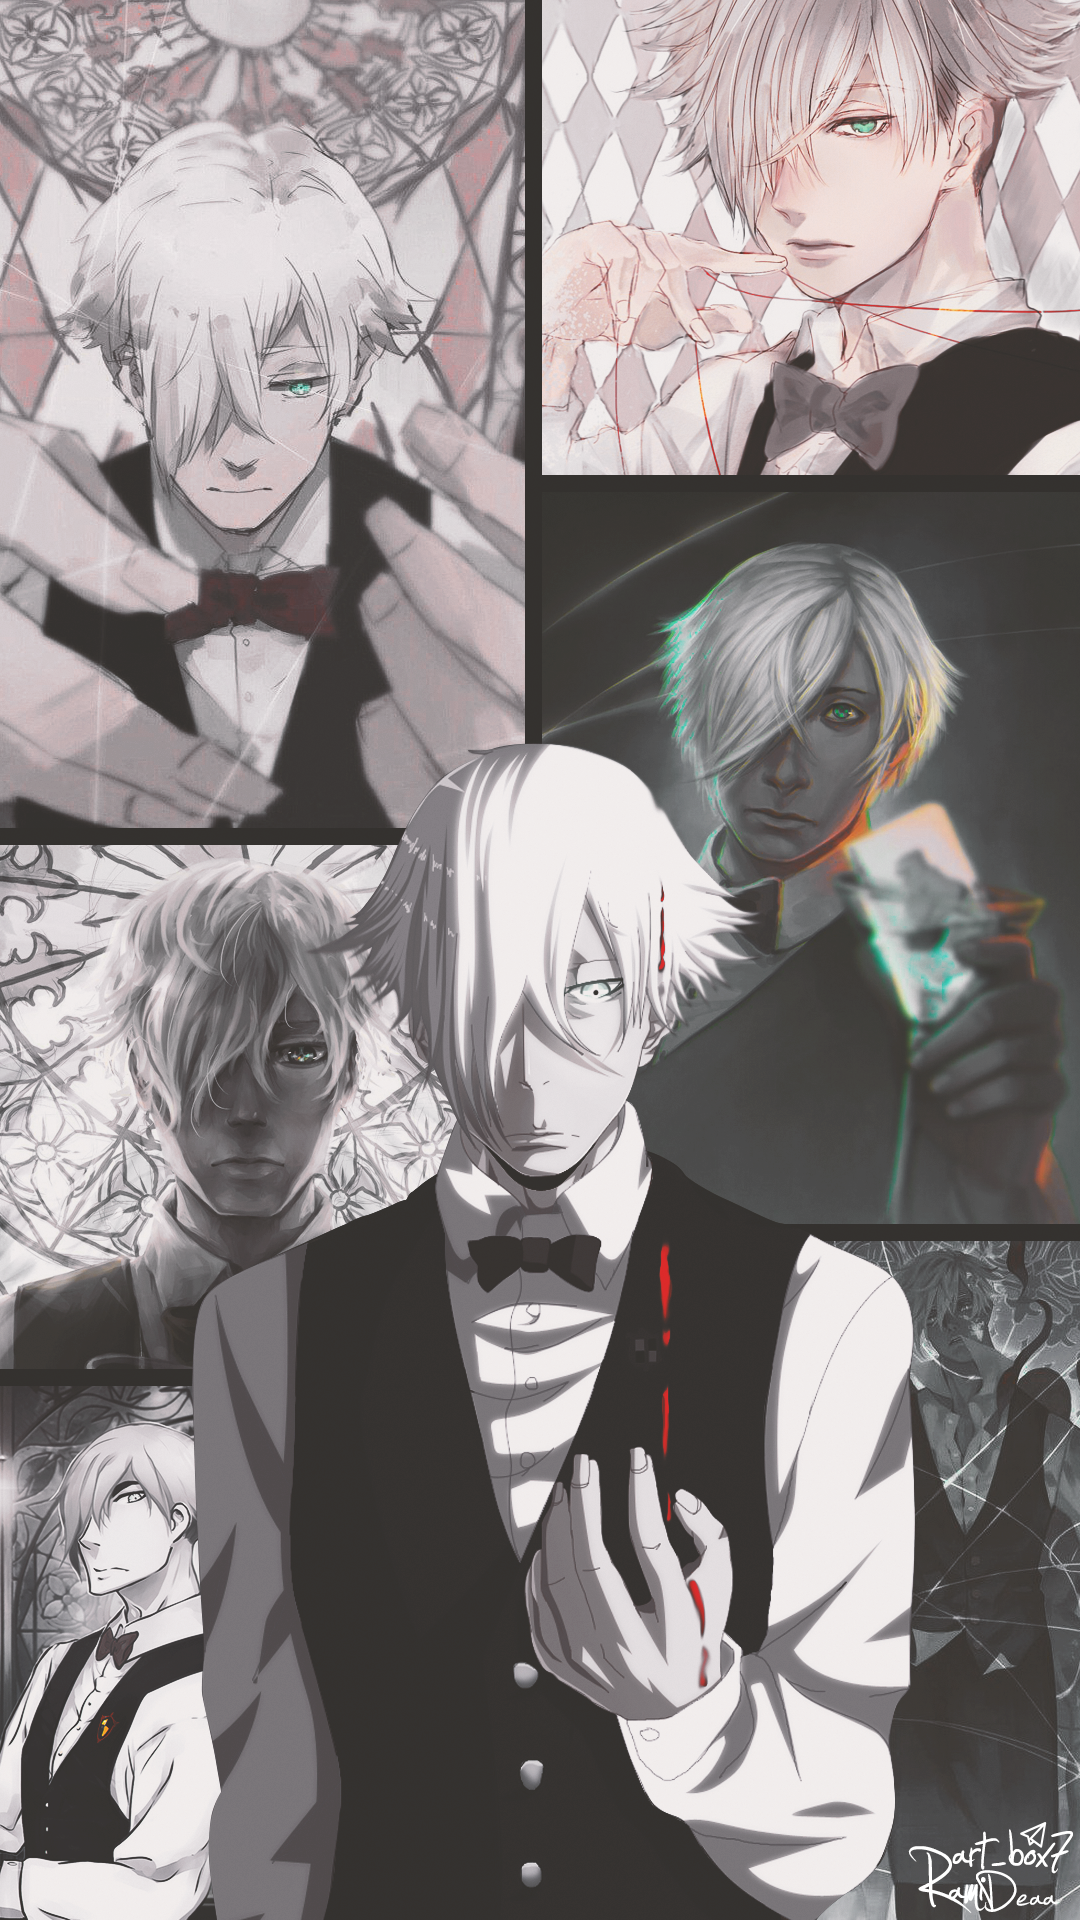 50+ Death Parade HD Wallpapers and Backgrounds